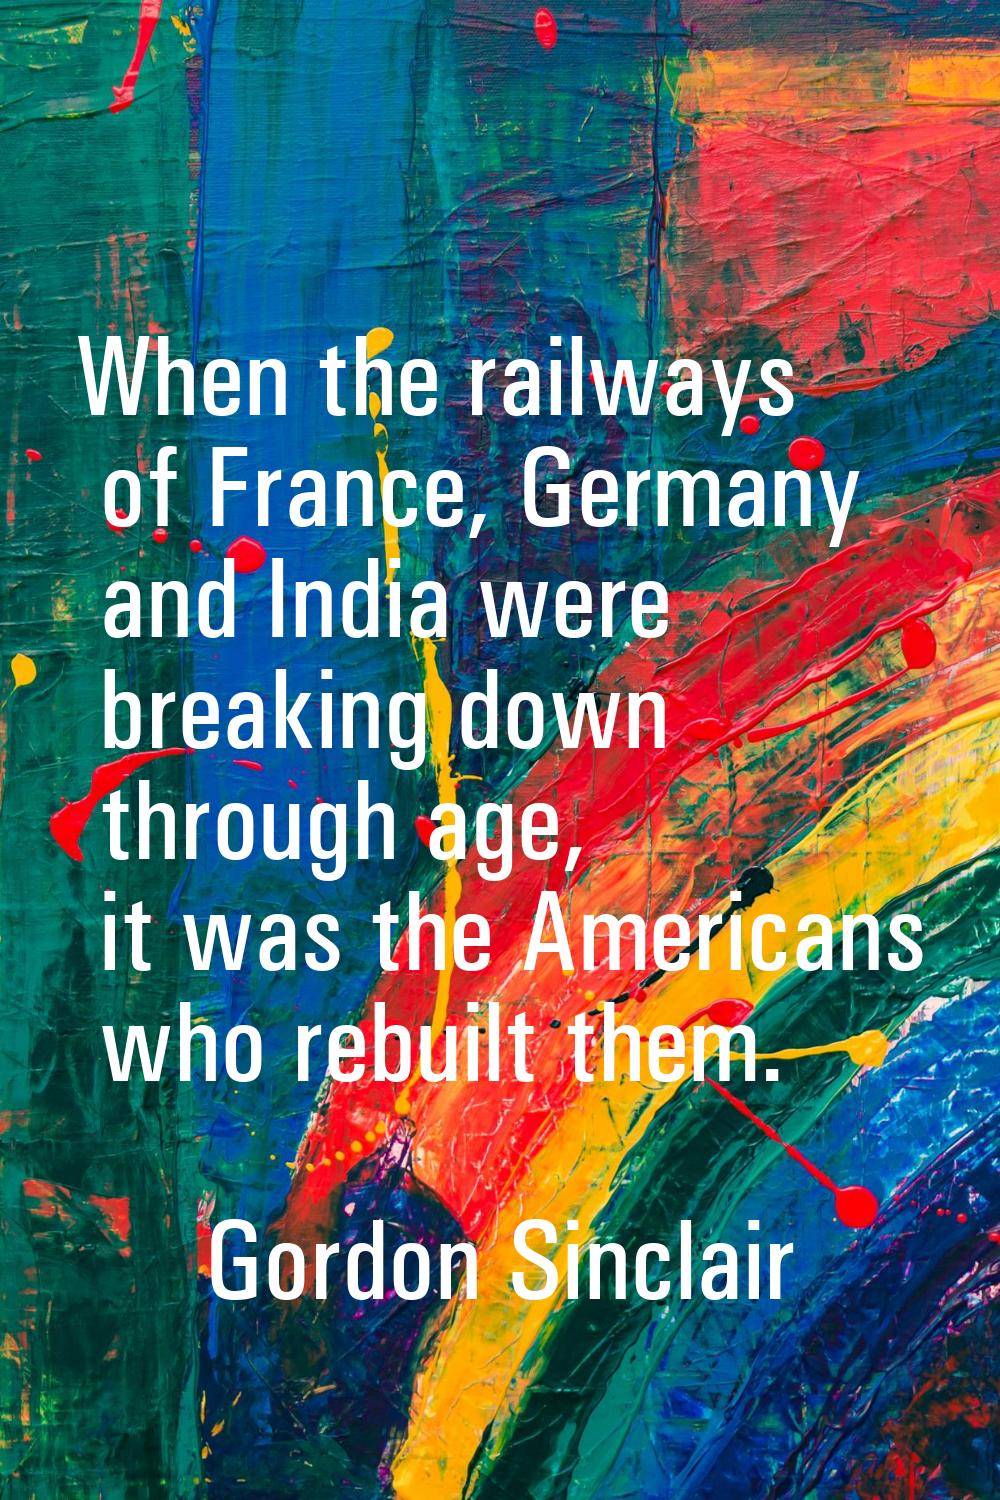 When the railways of France, Germany and India were breaking down through age, it was the Americans